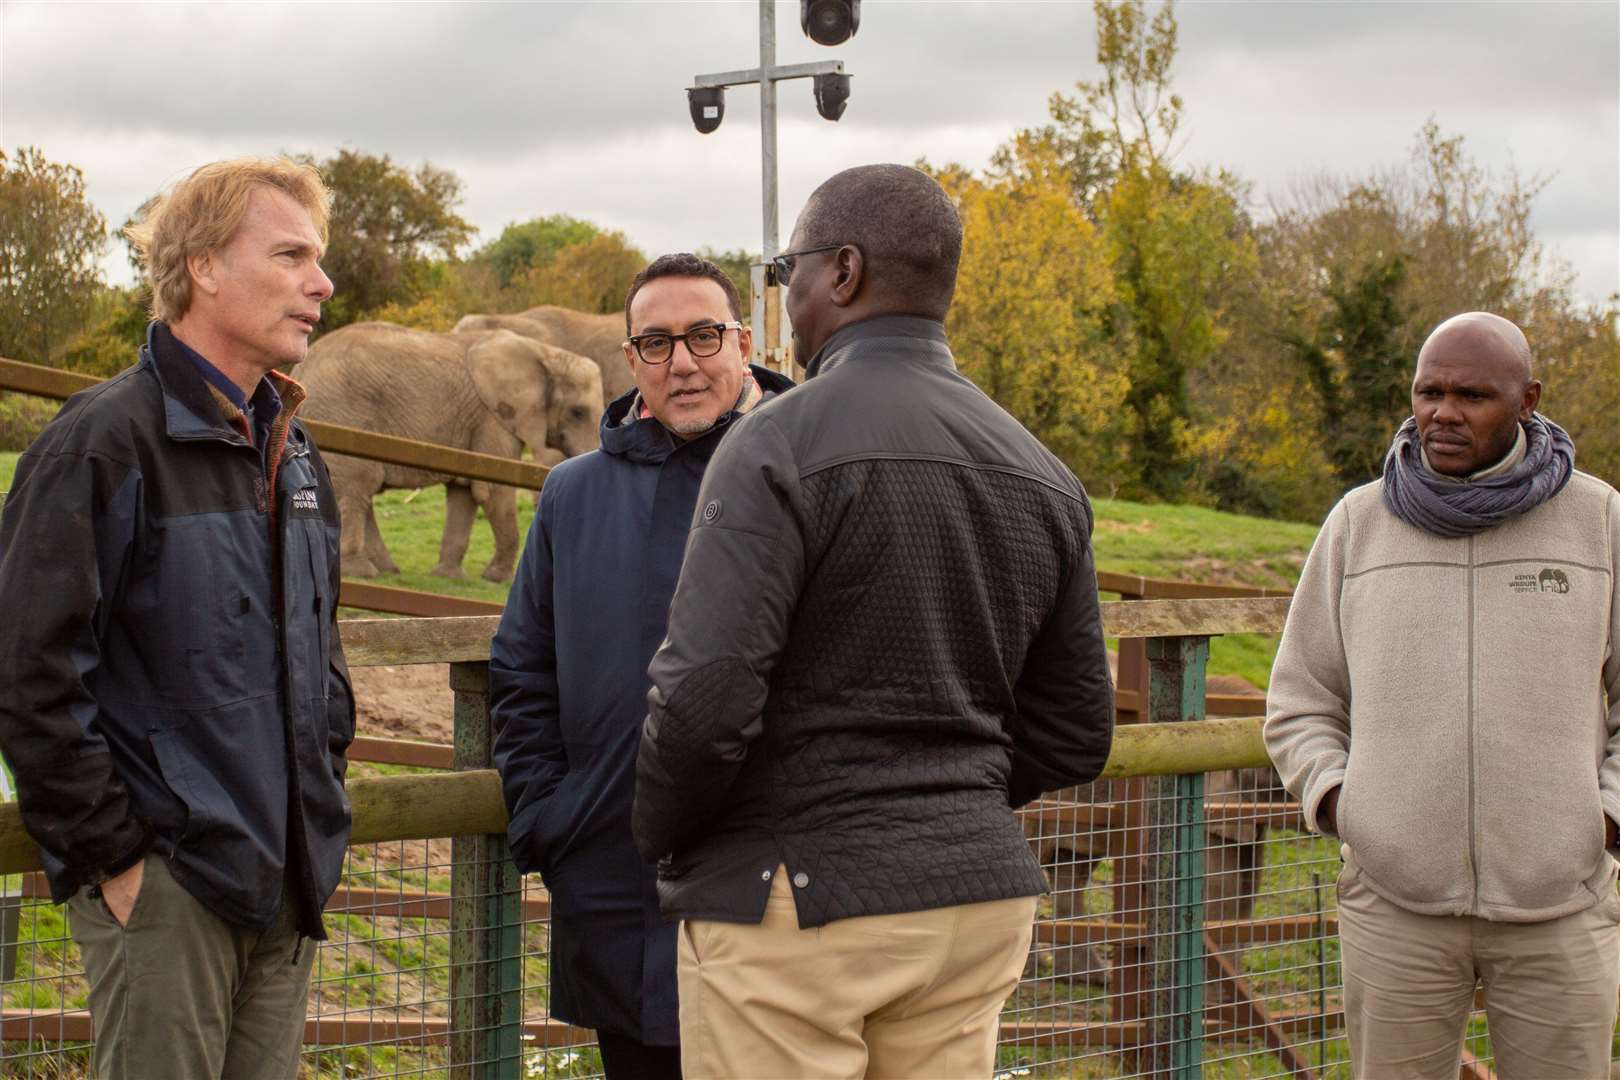 Damian Aspinall met with Kenyan officials at Howletts to discuss the project. Picture: Aspinall Foundation